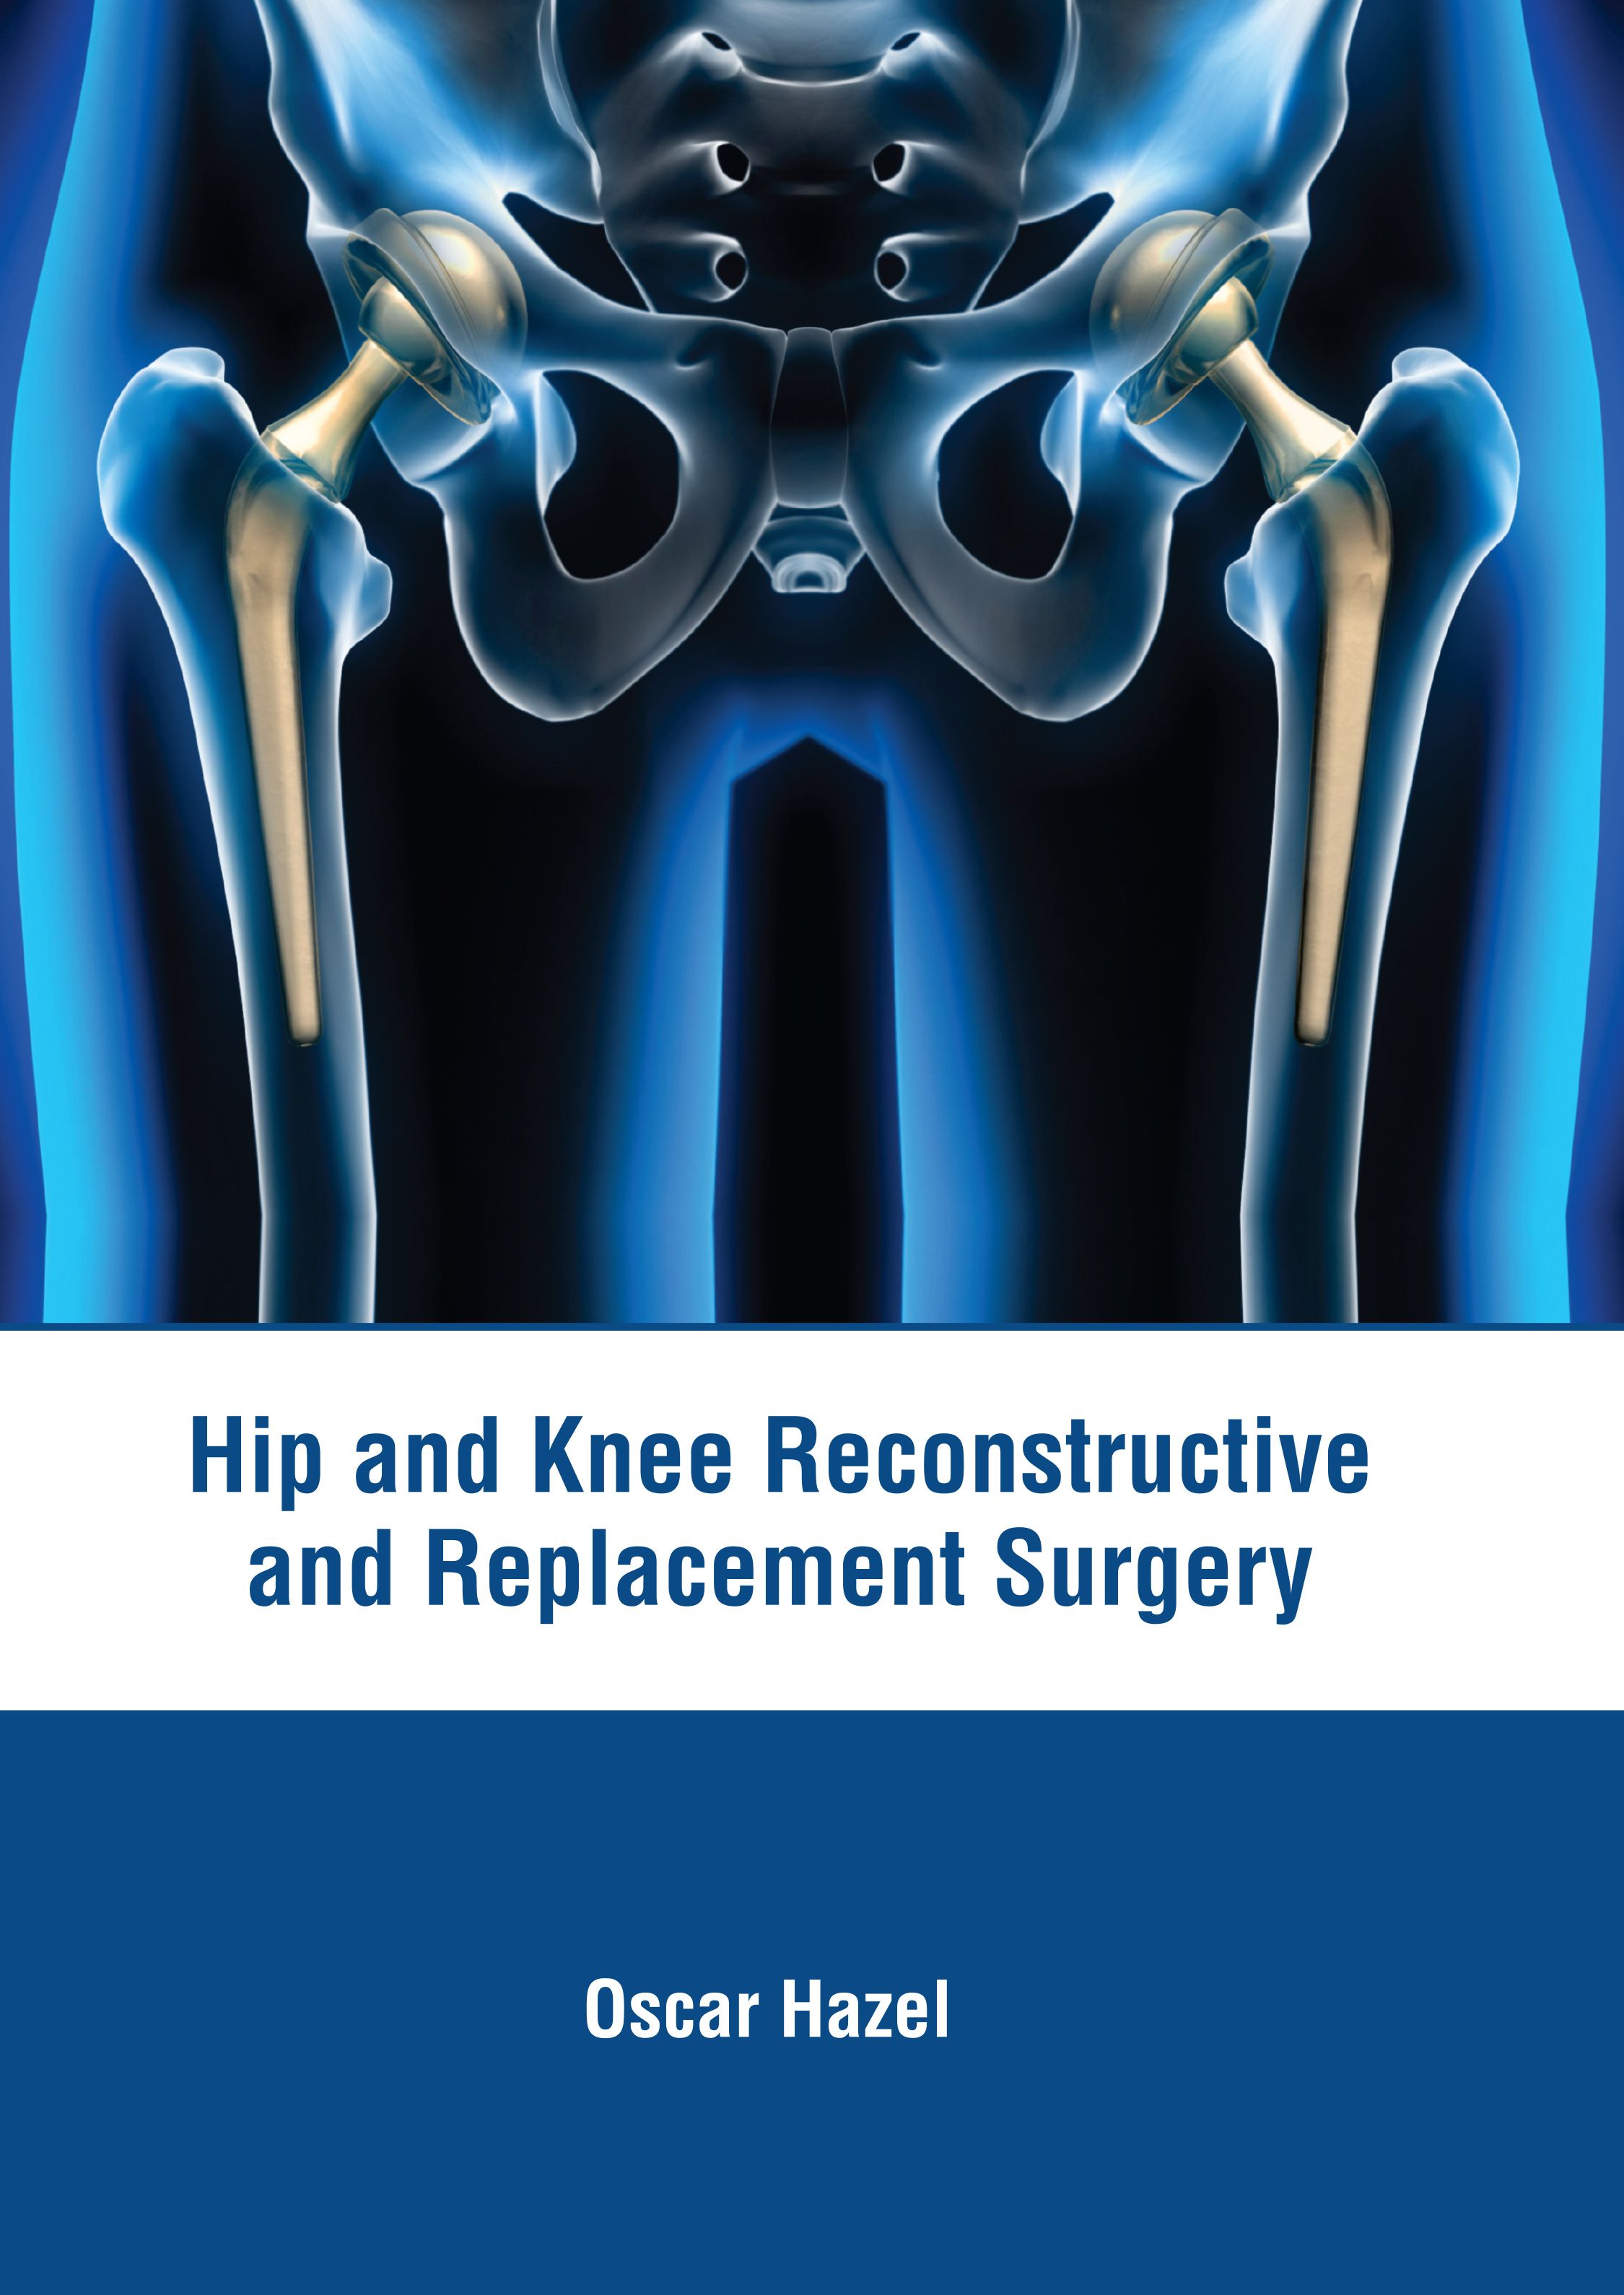 HIP AND KNEE RECONSTRUCTIVE AND REPLACEMENT SURGERY